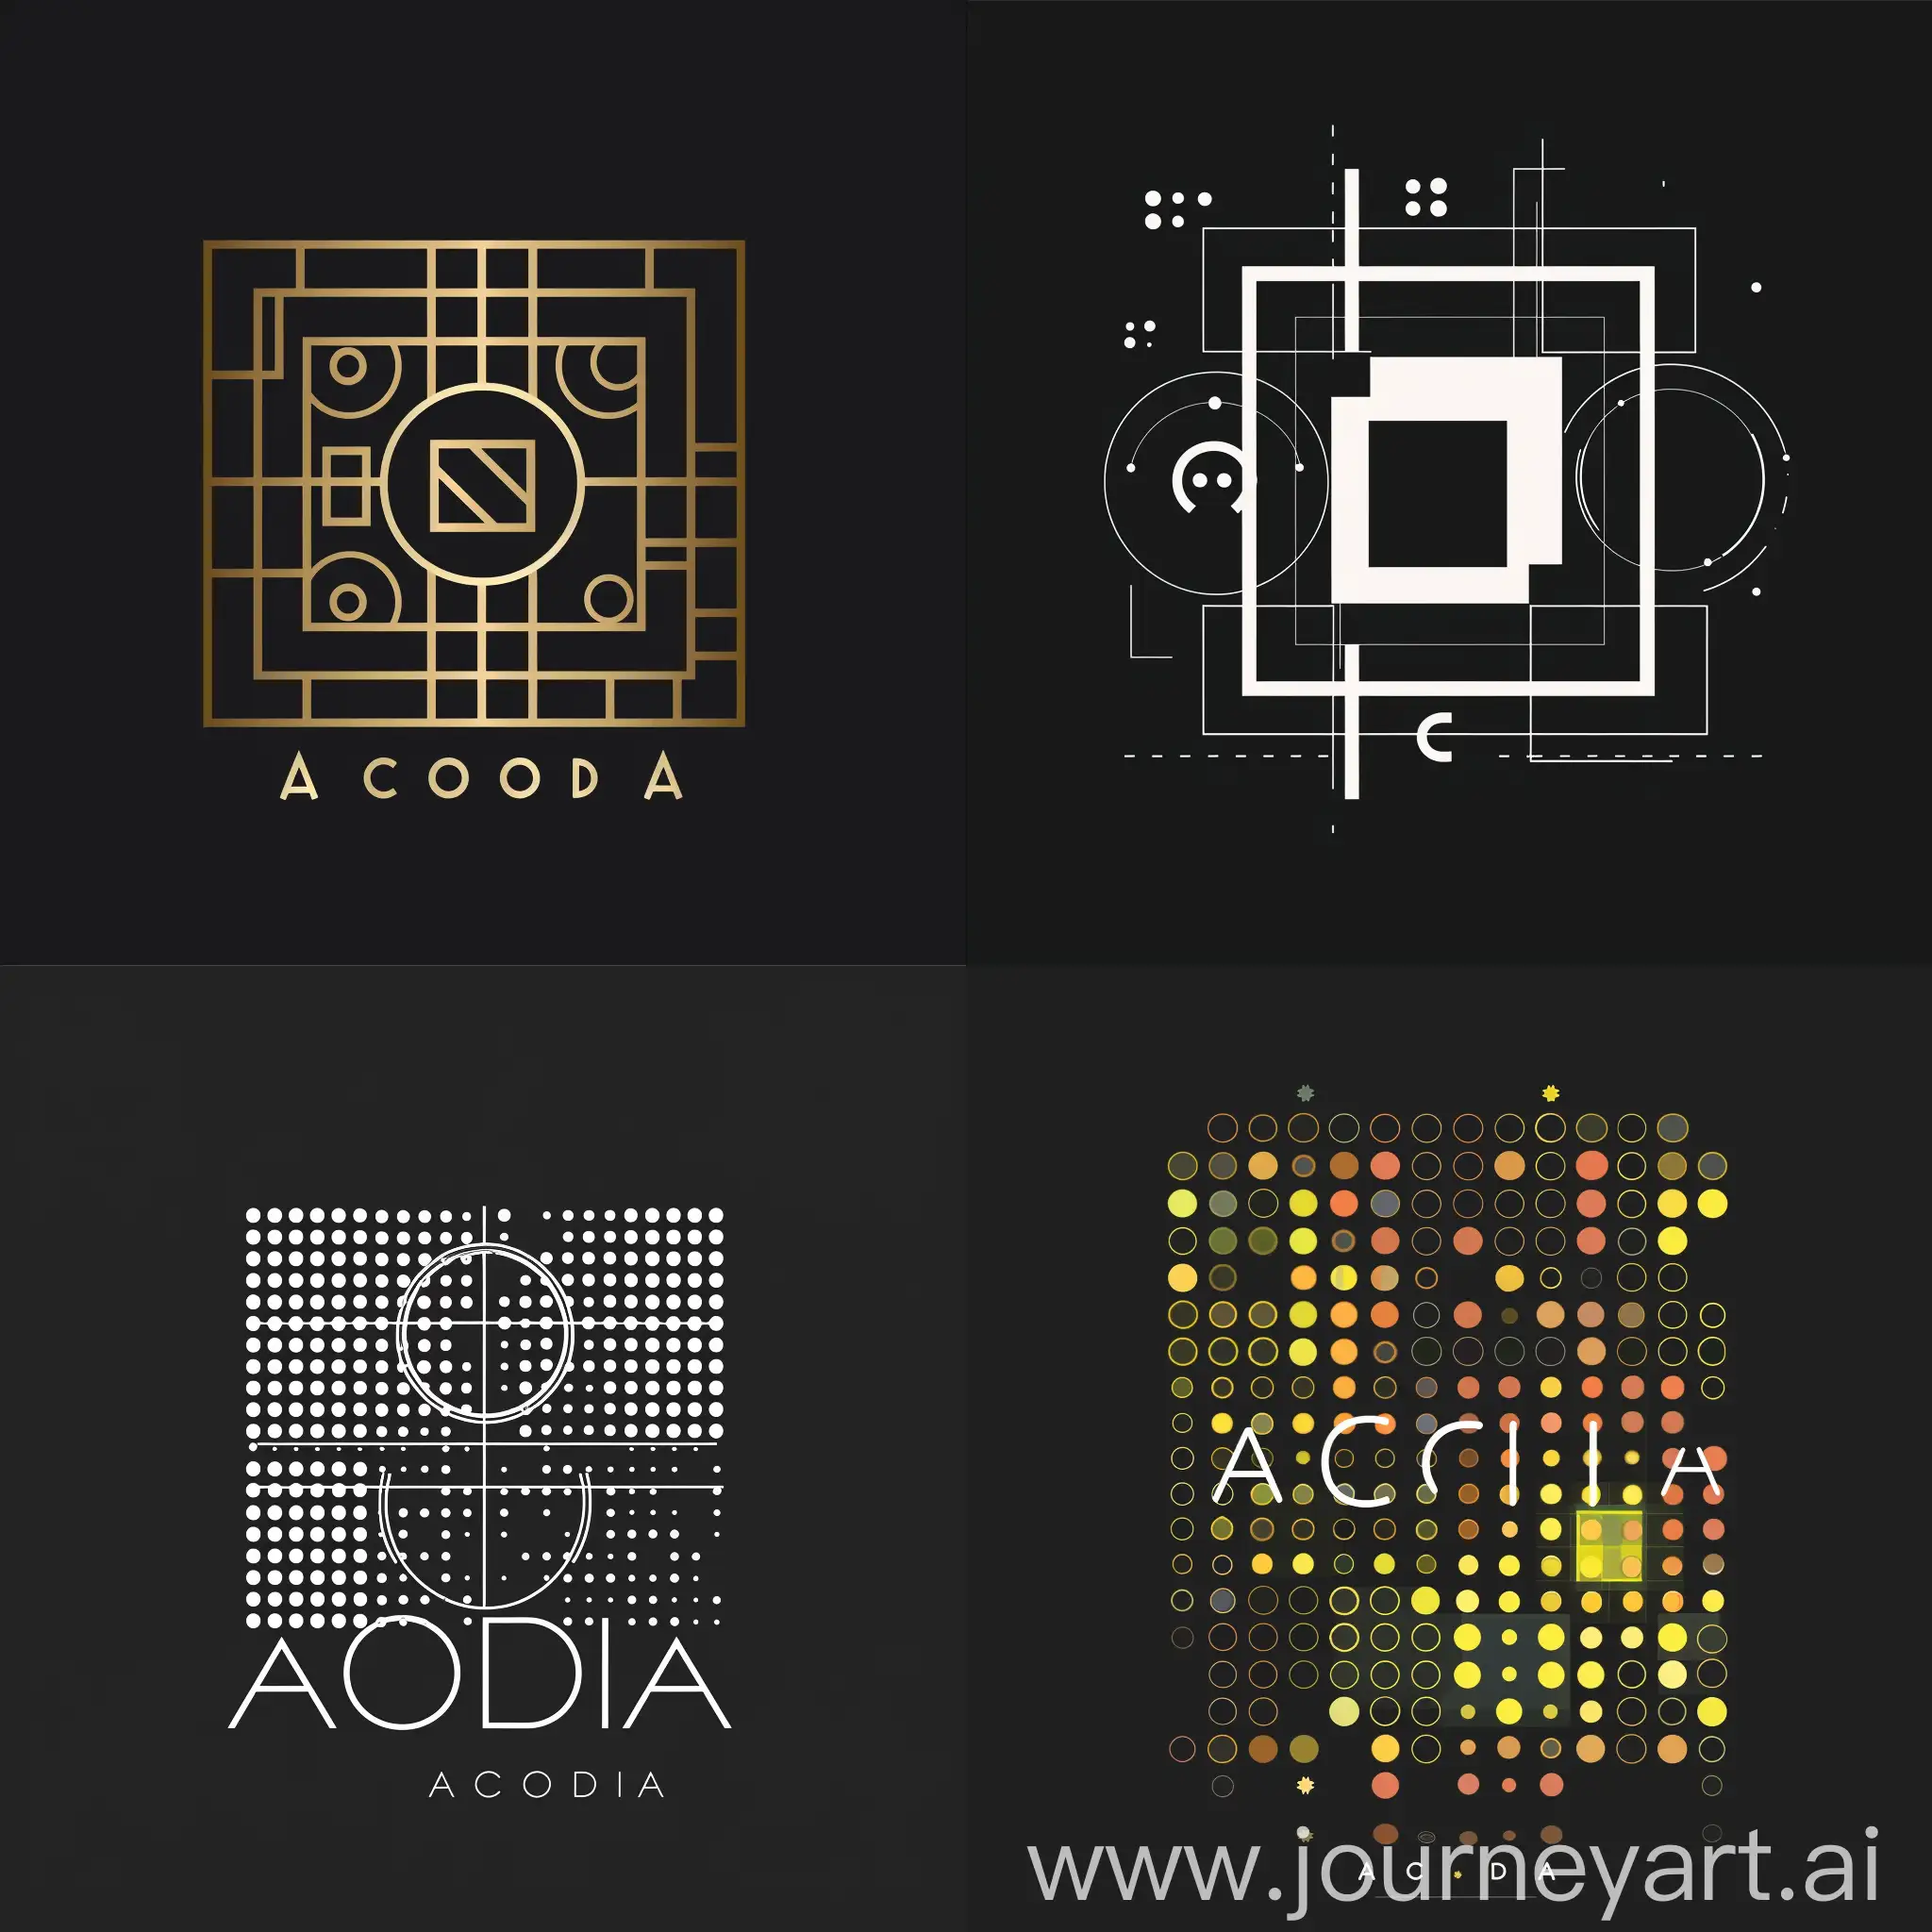 create a logo for a IT company using square and circles, name of the company is ACODIA